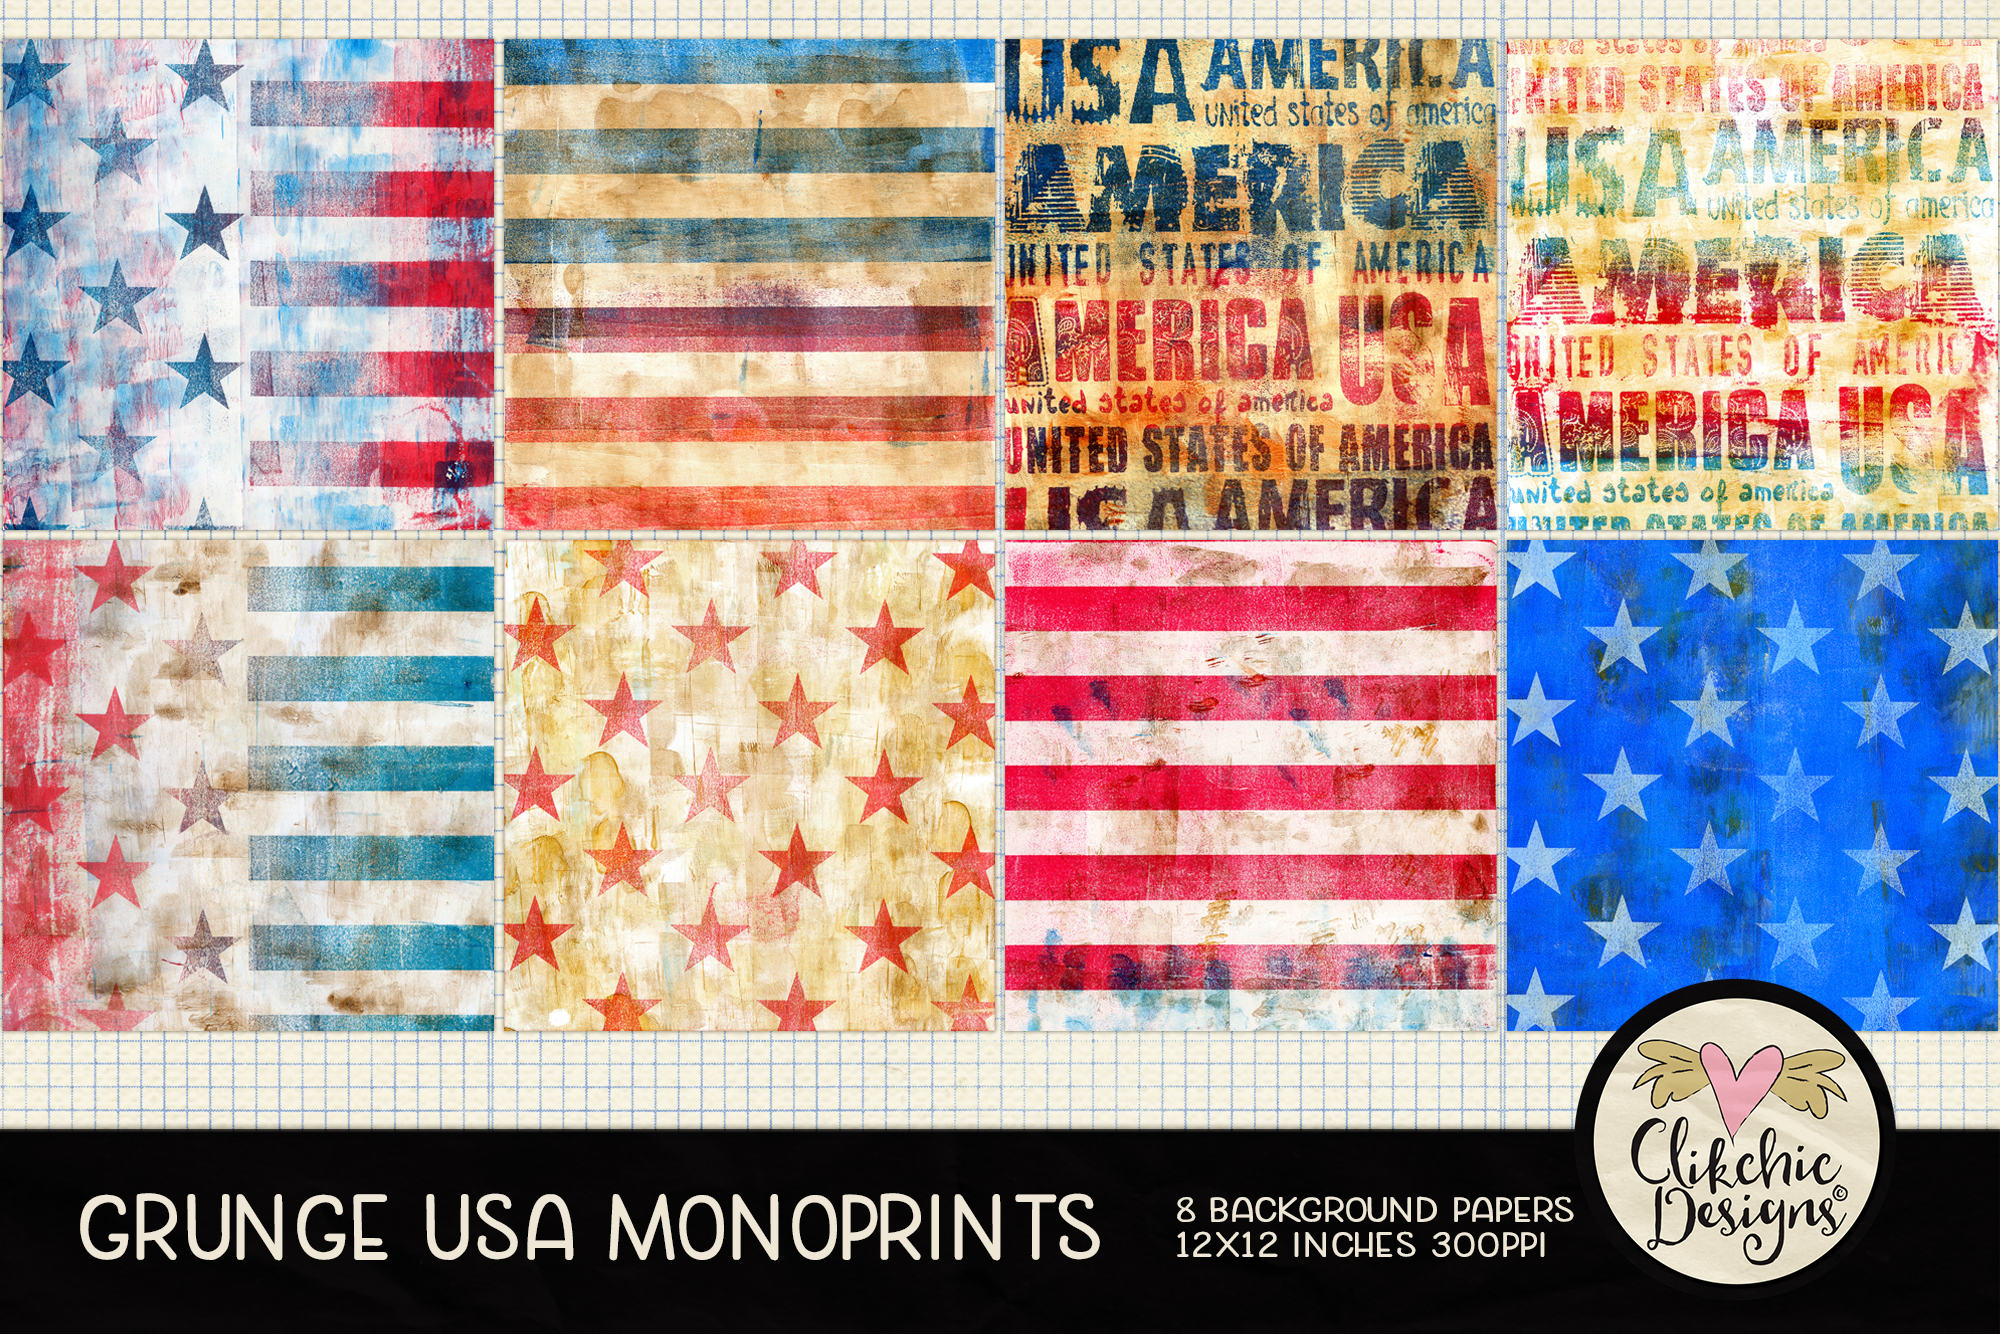 Grunge USA Monoprints Printable Background Texture Papers